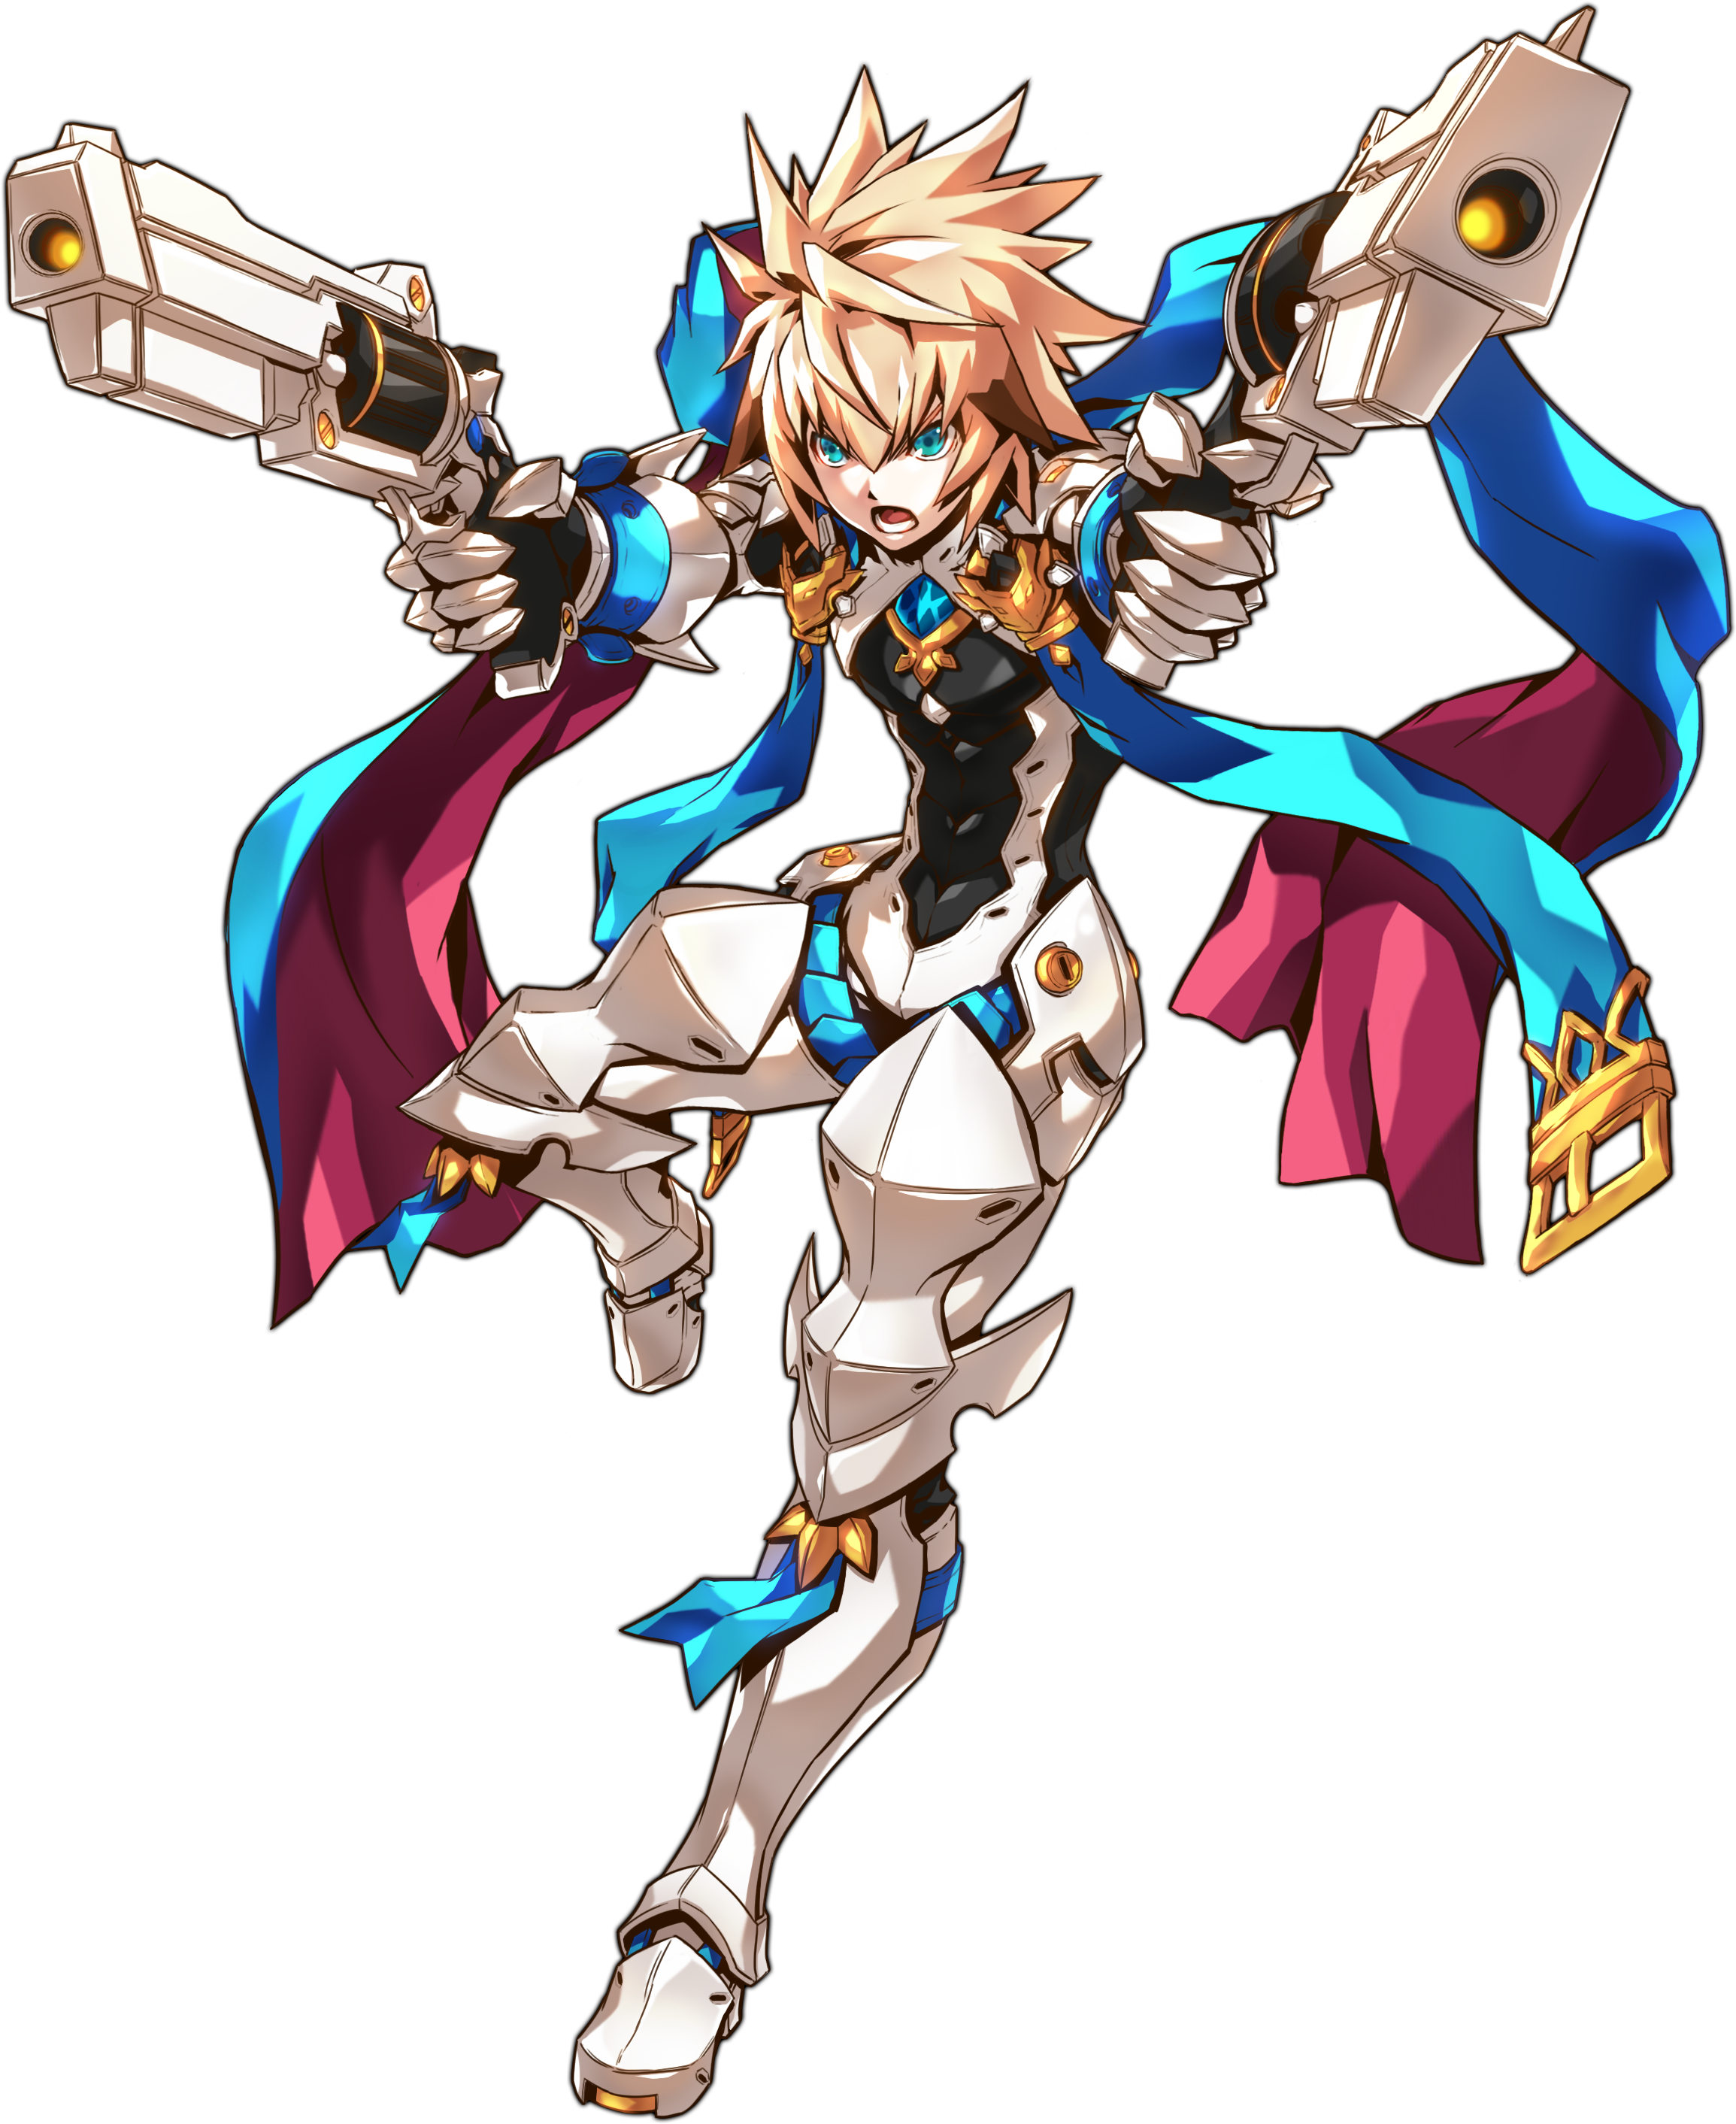 [elsword] Dc Skill Cut-in - Elsword Chung Deadly Chaser (2369x2898)